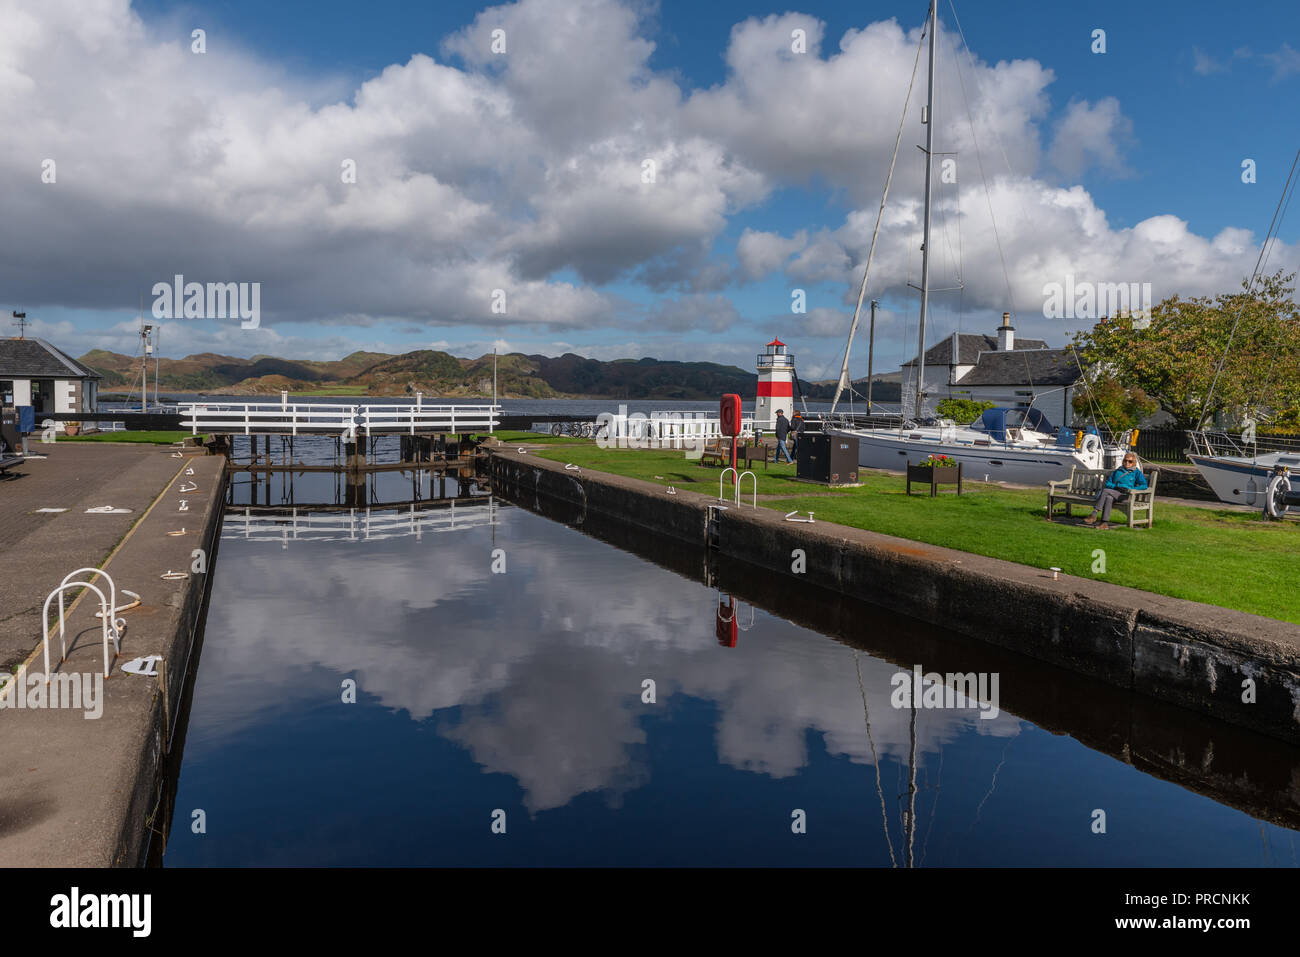 The Last Lock Gate, No 15, on the Crinan Canal as it enter Loch Craignish from the Crinan Canal Basin in Argyll Scotland Stock Photo